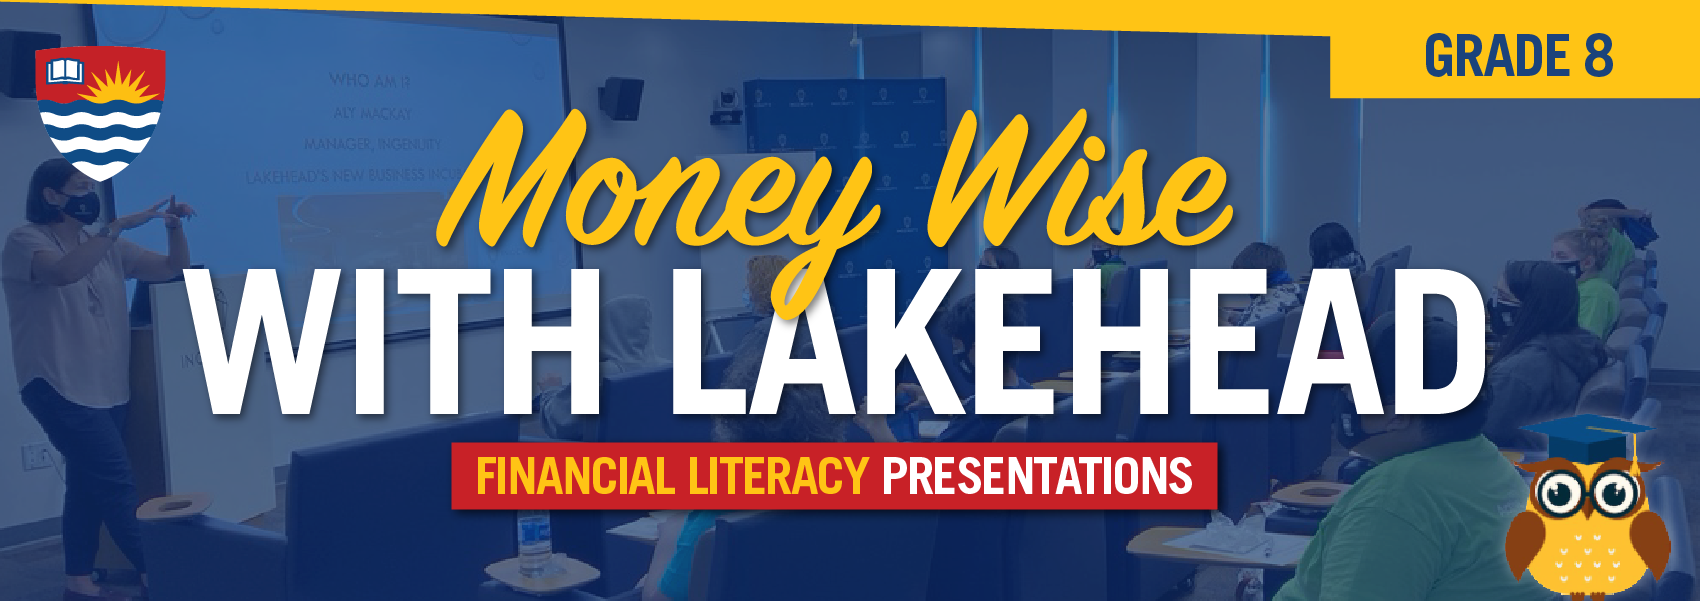 Money wise with lakehead, financial literacy presentations